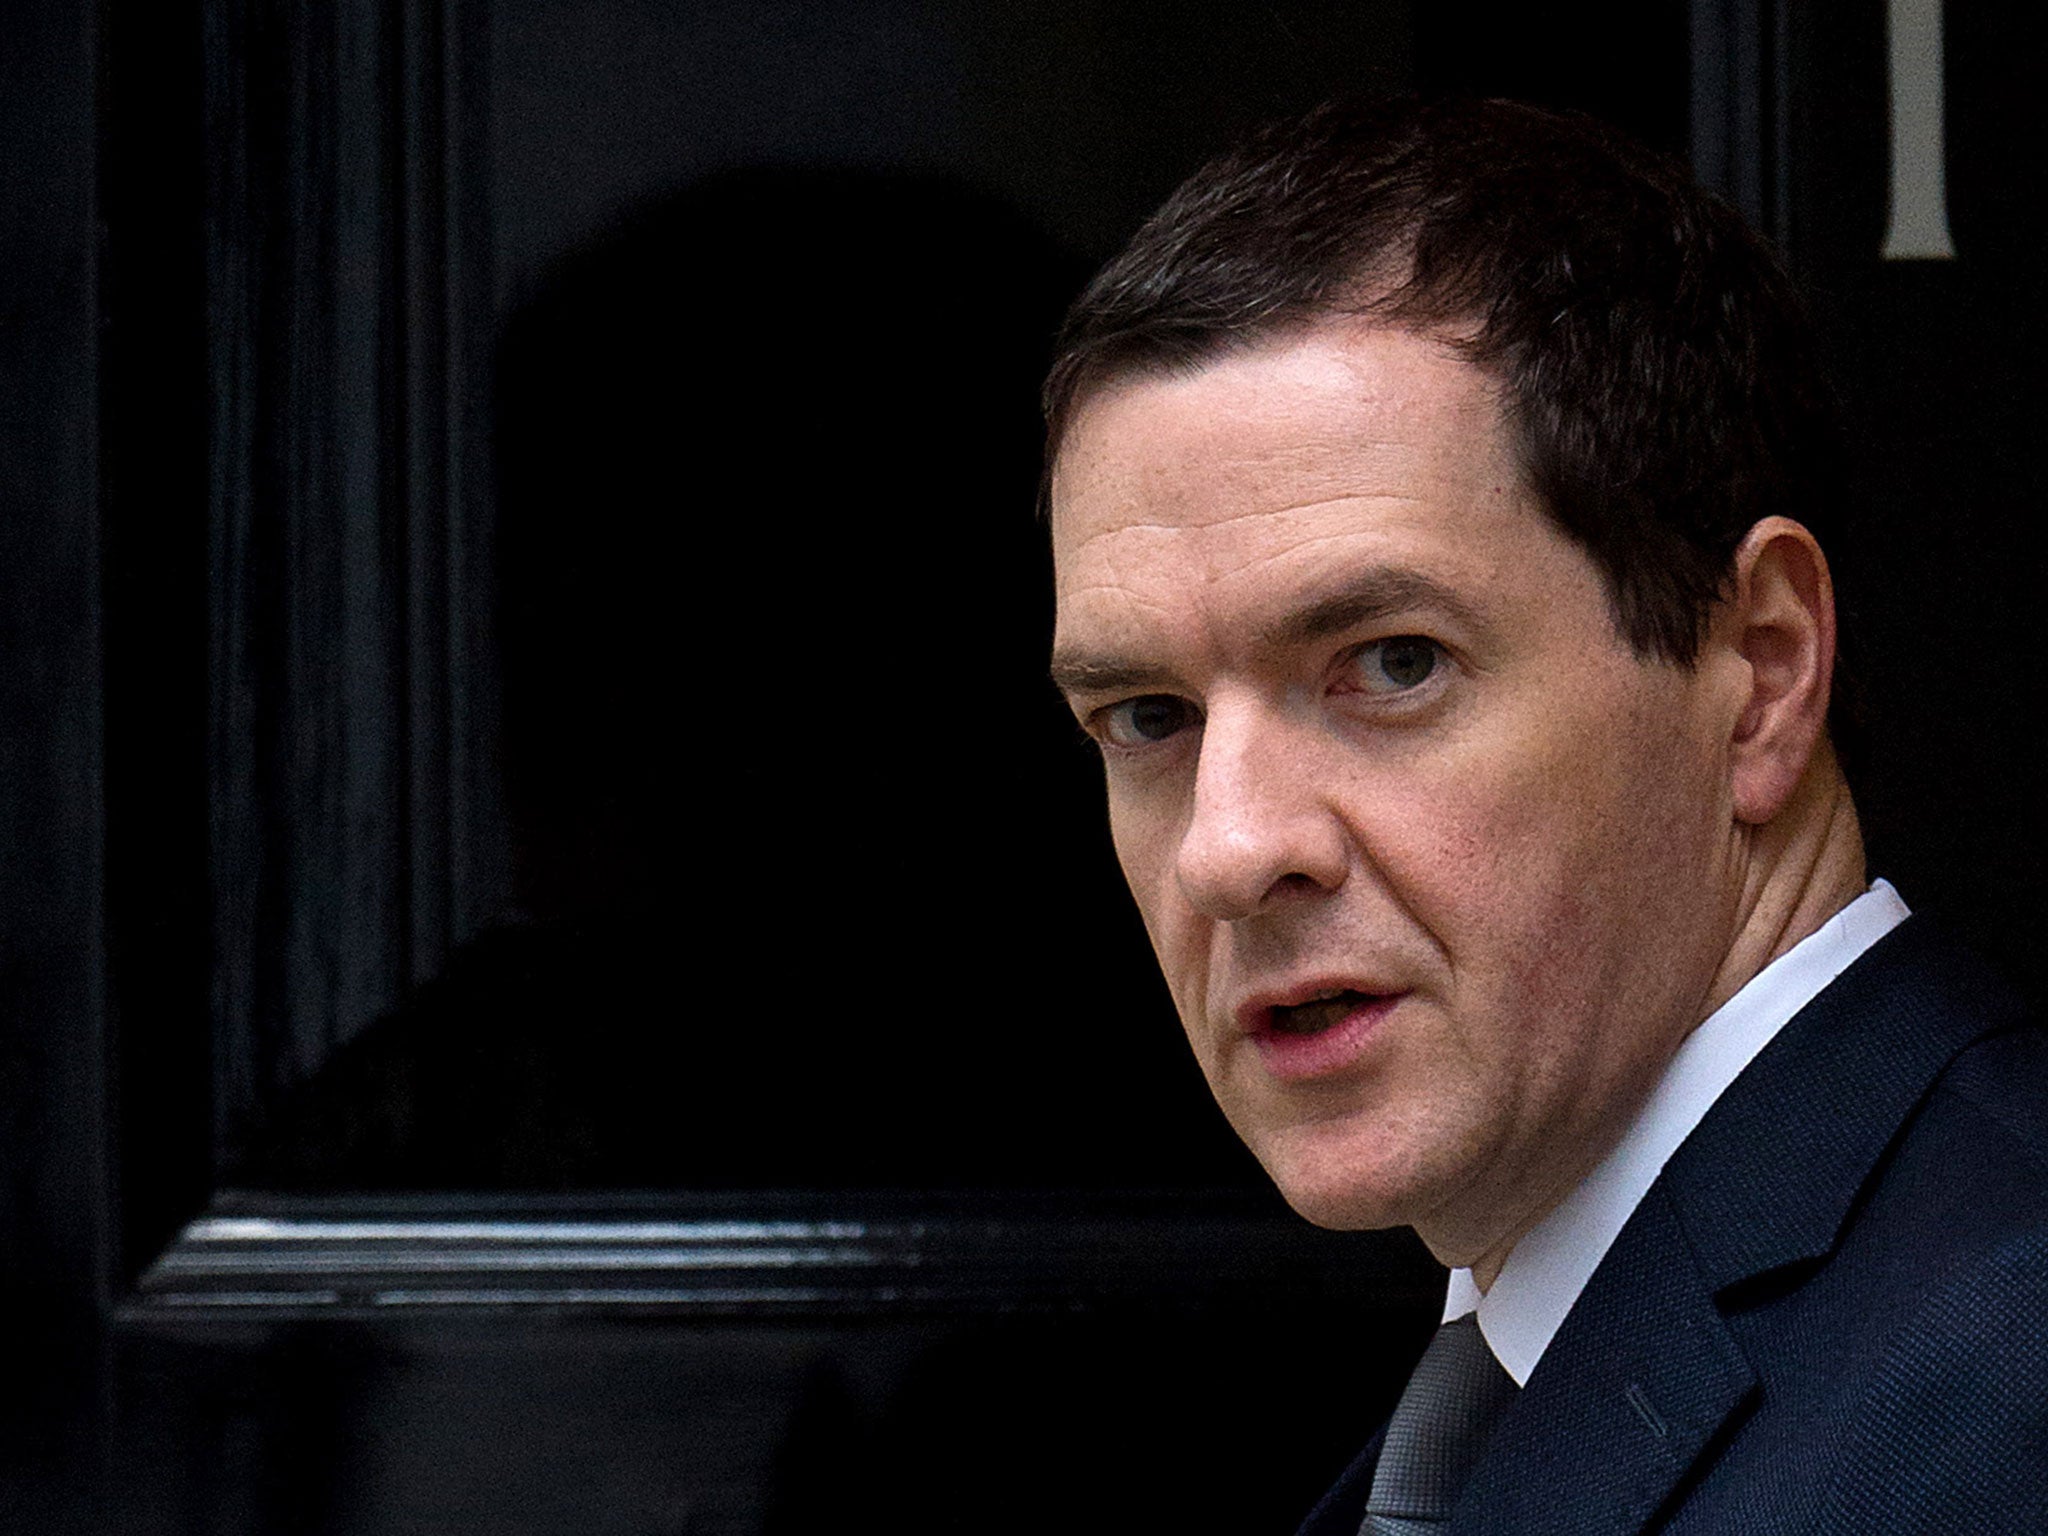 The latest OBR figures will come as unwelcome news for the Chancellor George Osborne